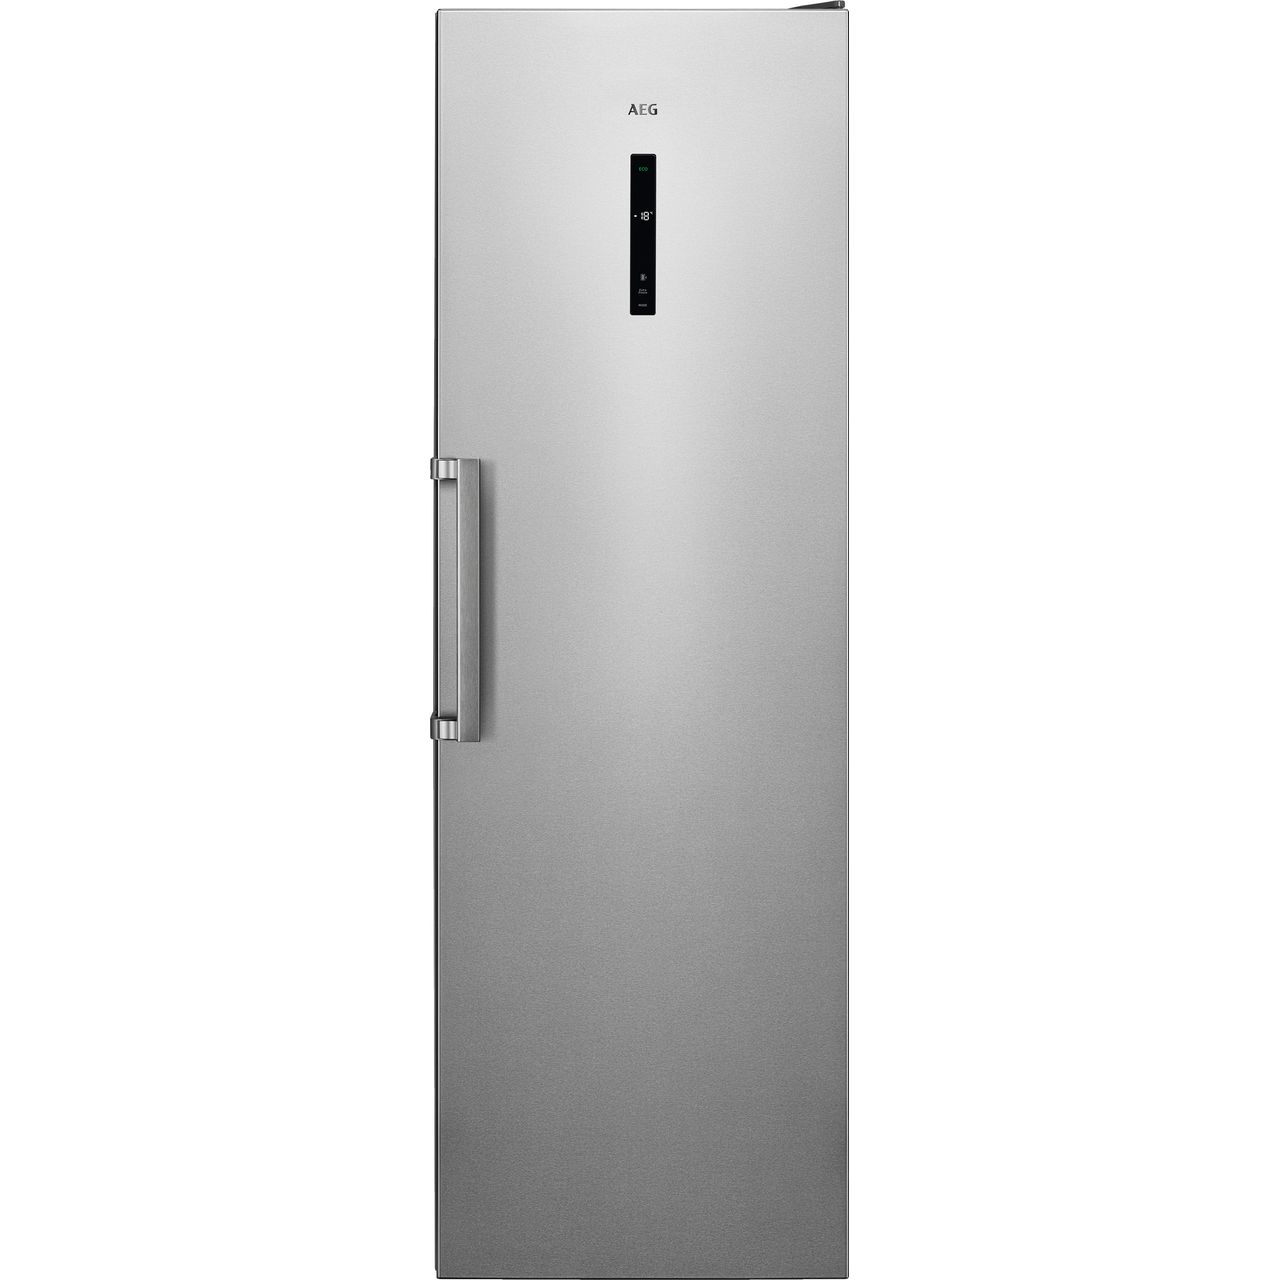 AEG AGB728E5NX Frost Free Upright Freezer Review